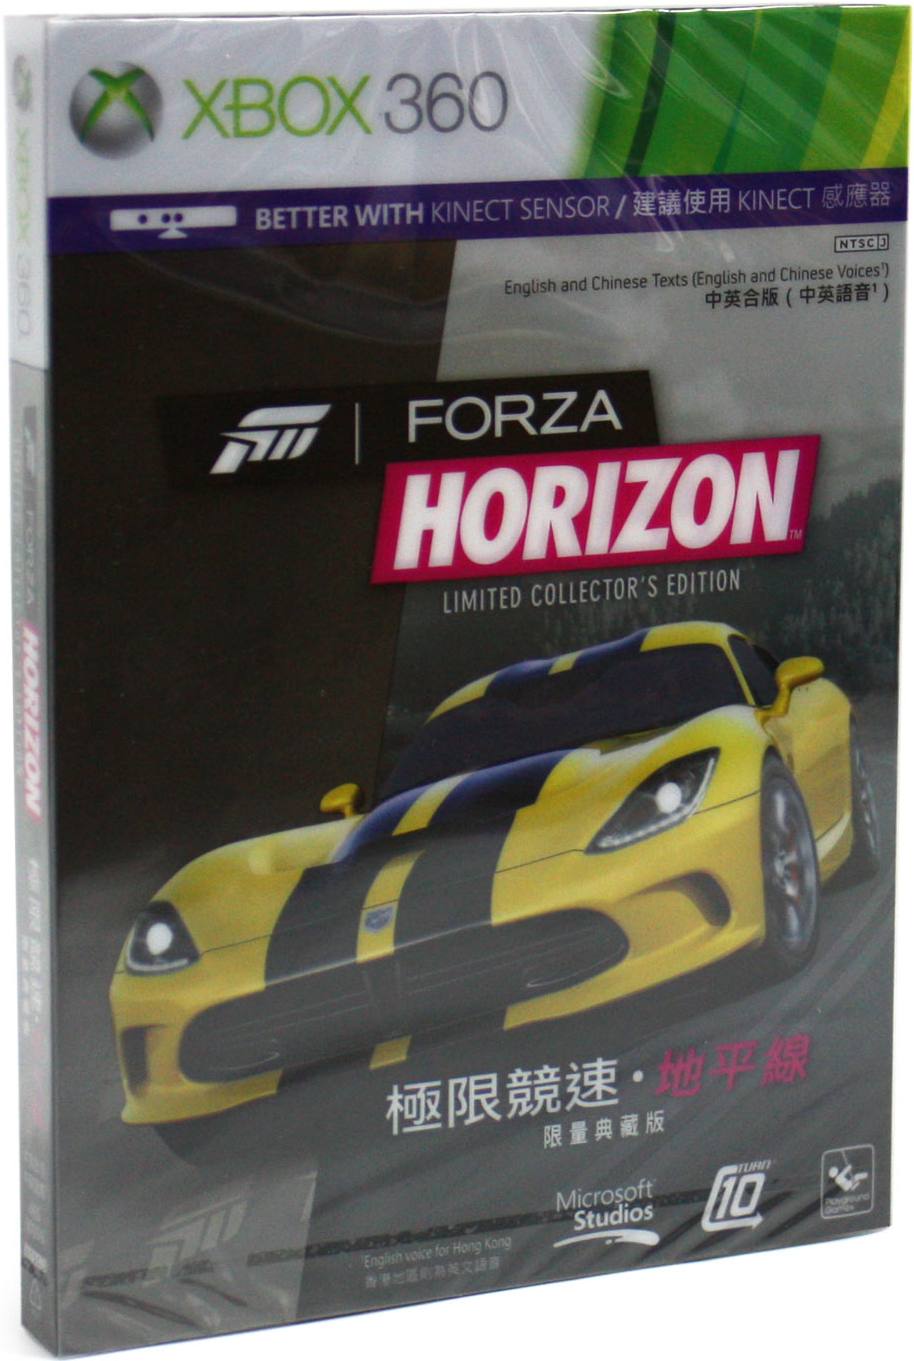 Republiek meel eeuw Forza Horizon (Limited Collector's Edition) for Xbox360, Kinect